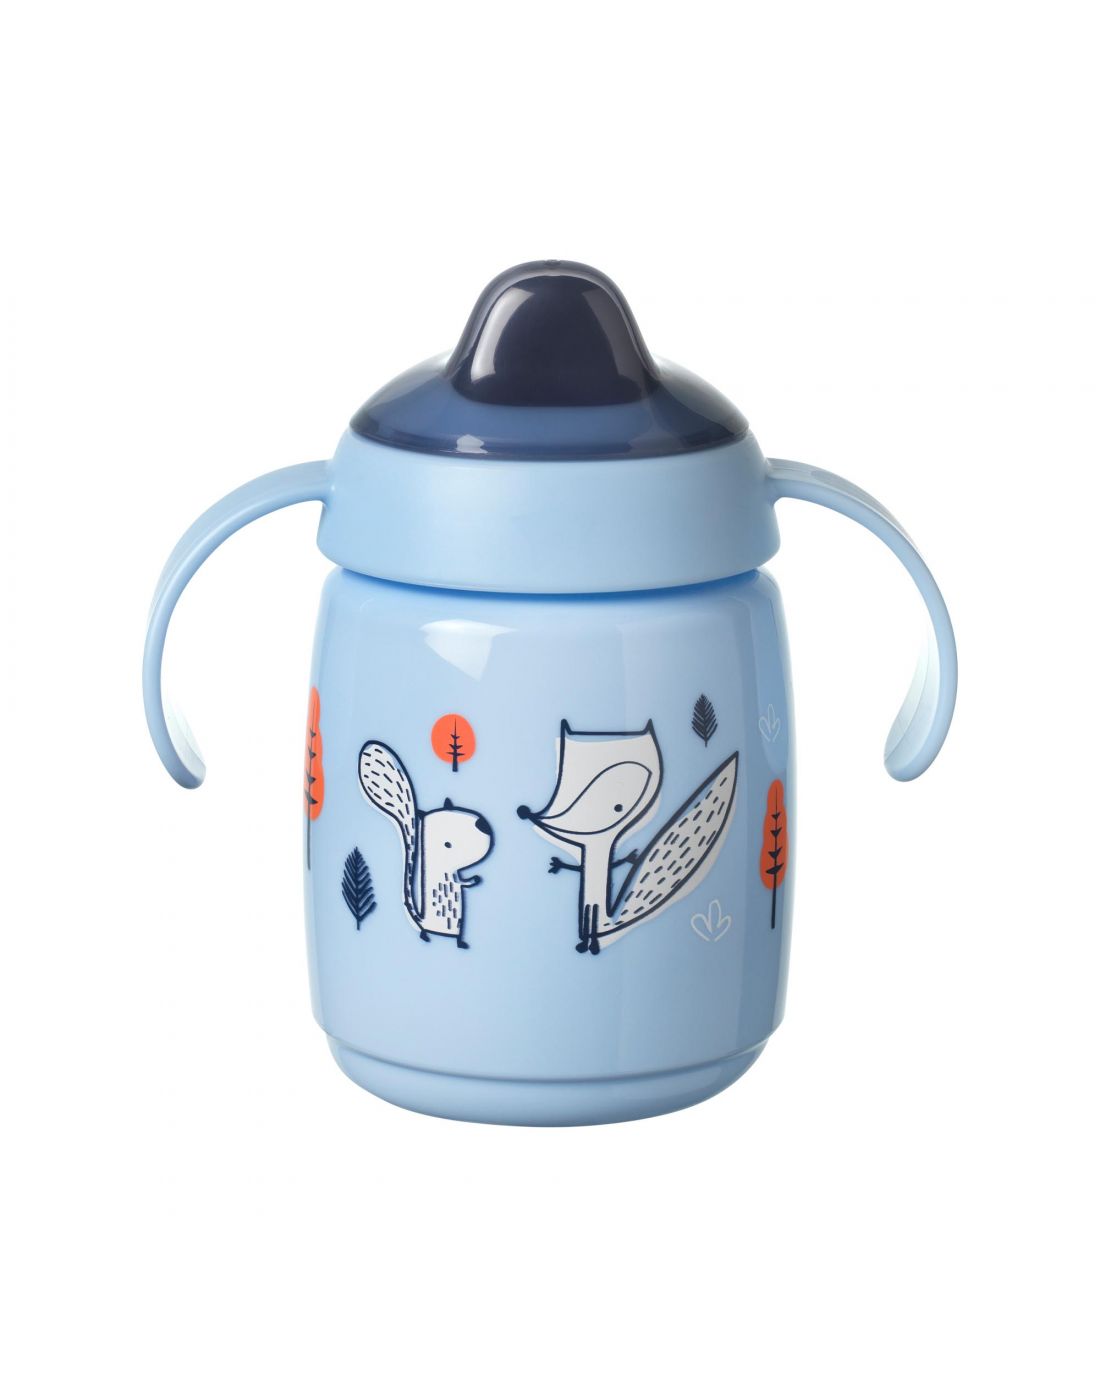 Tommee Tippee KidsTransition Cup Soft Spout Blue 300ml 6m+